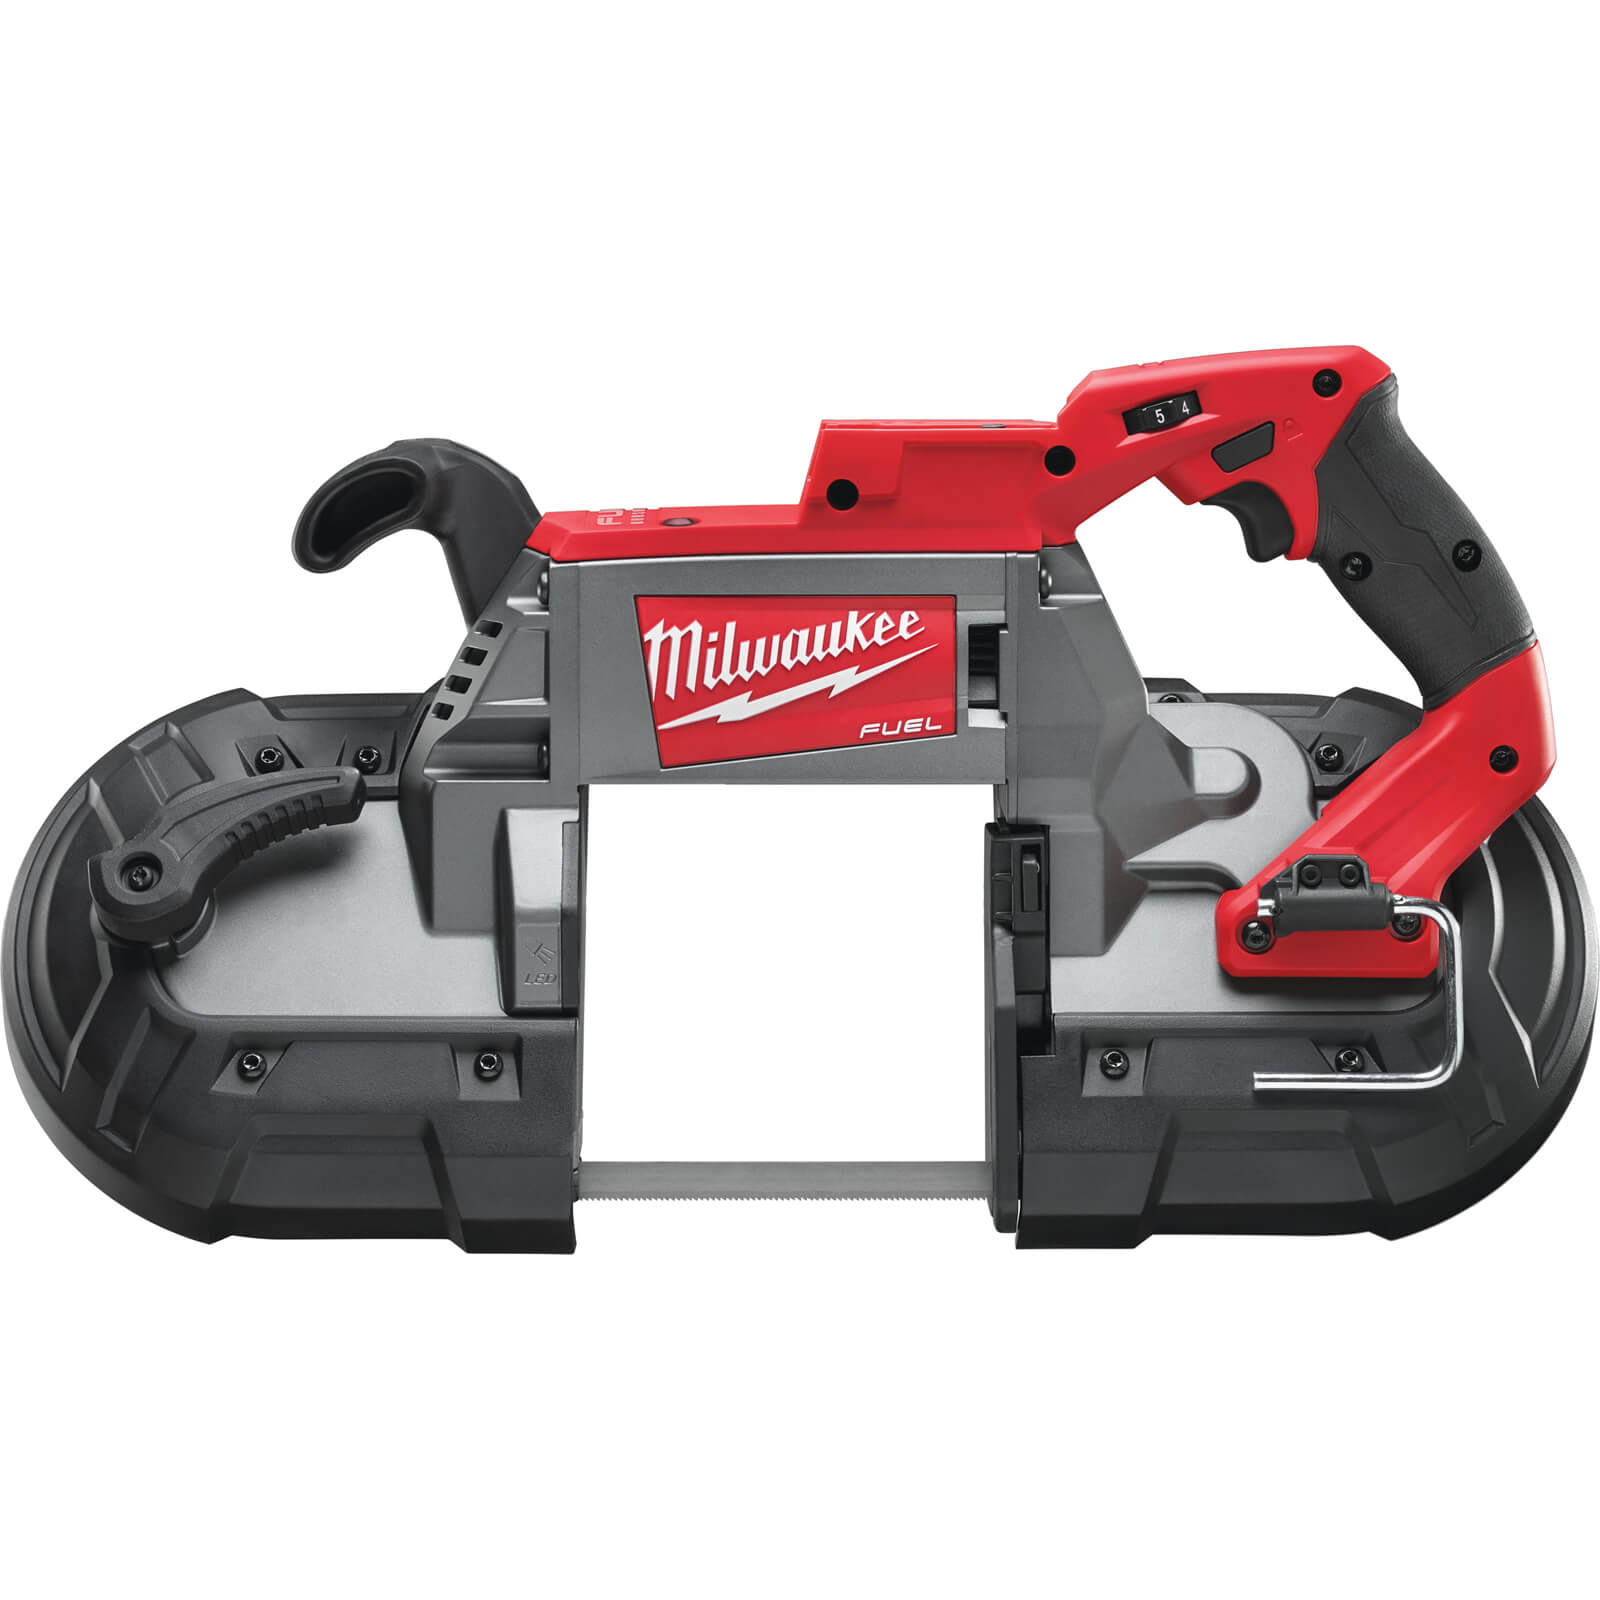 Image of Milwaukee M18 CBS125 Fuel 18v Cordless Brushless Bandsaw No Batteries No Charger No Case